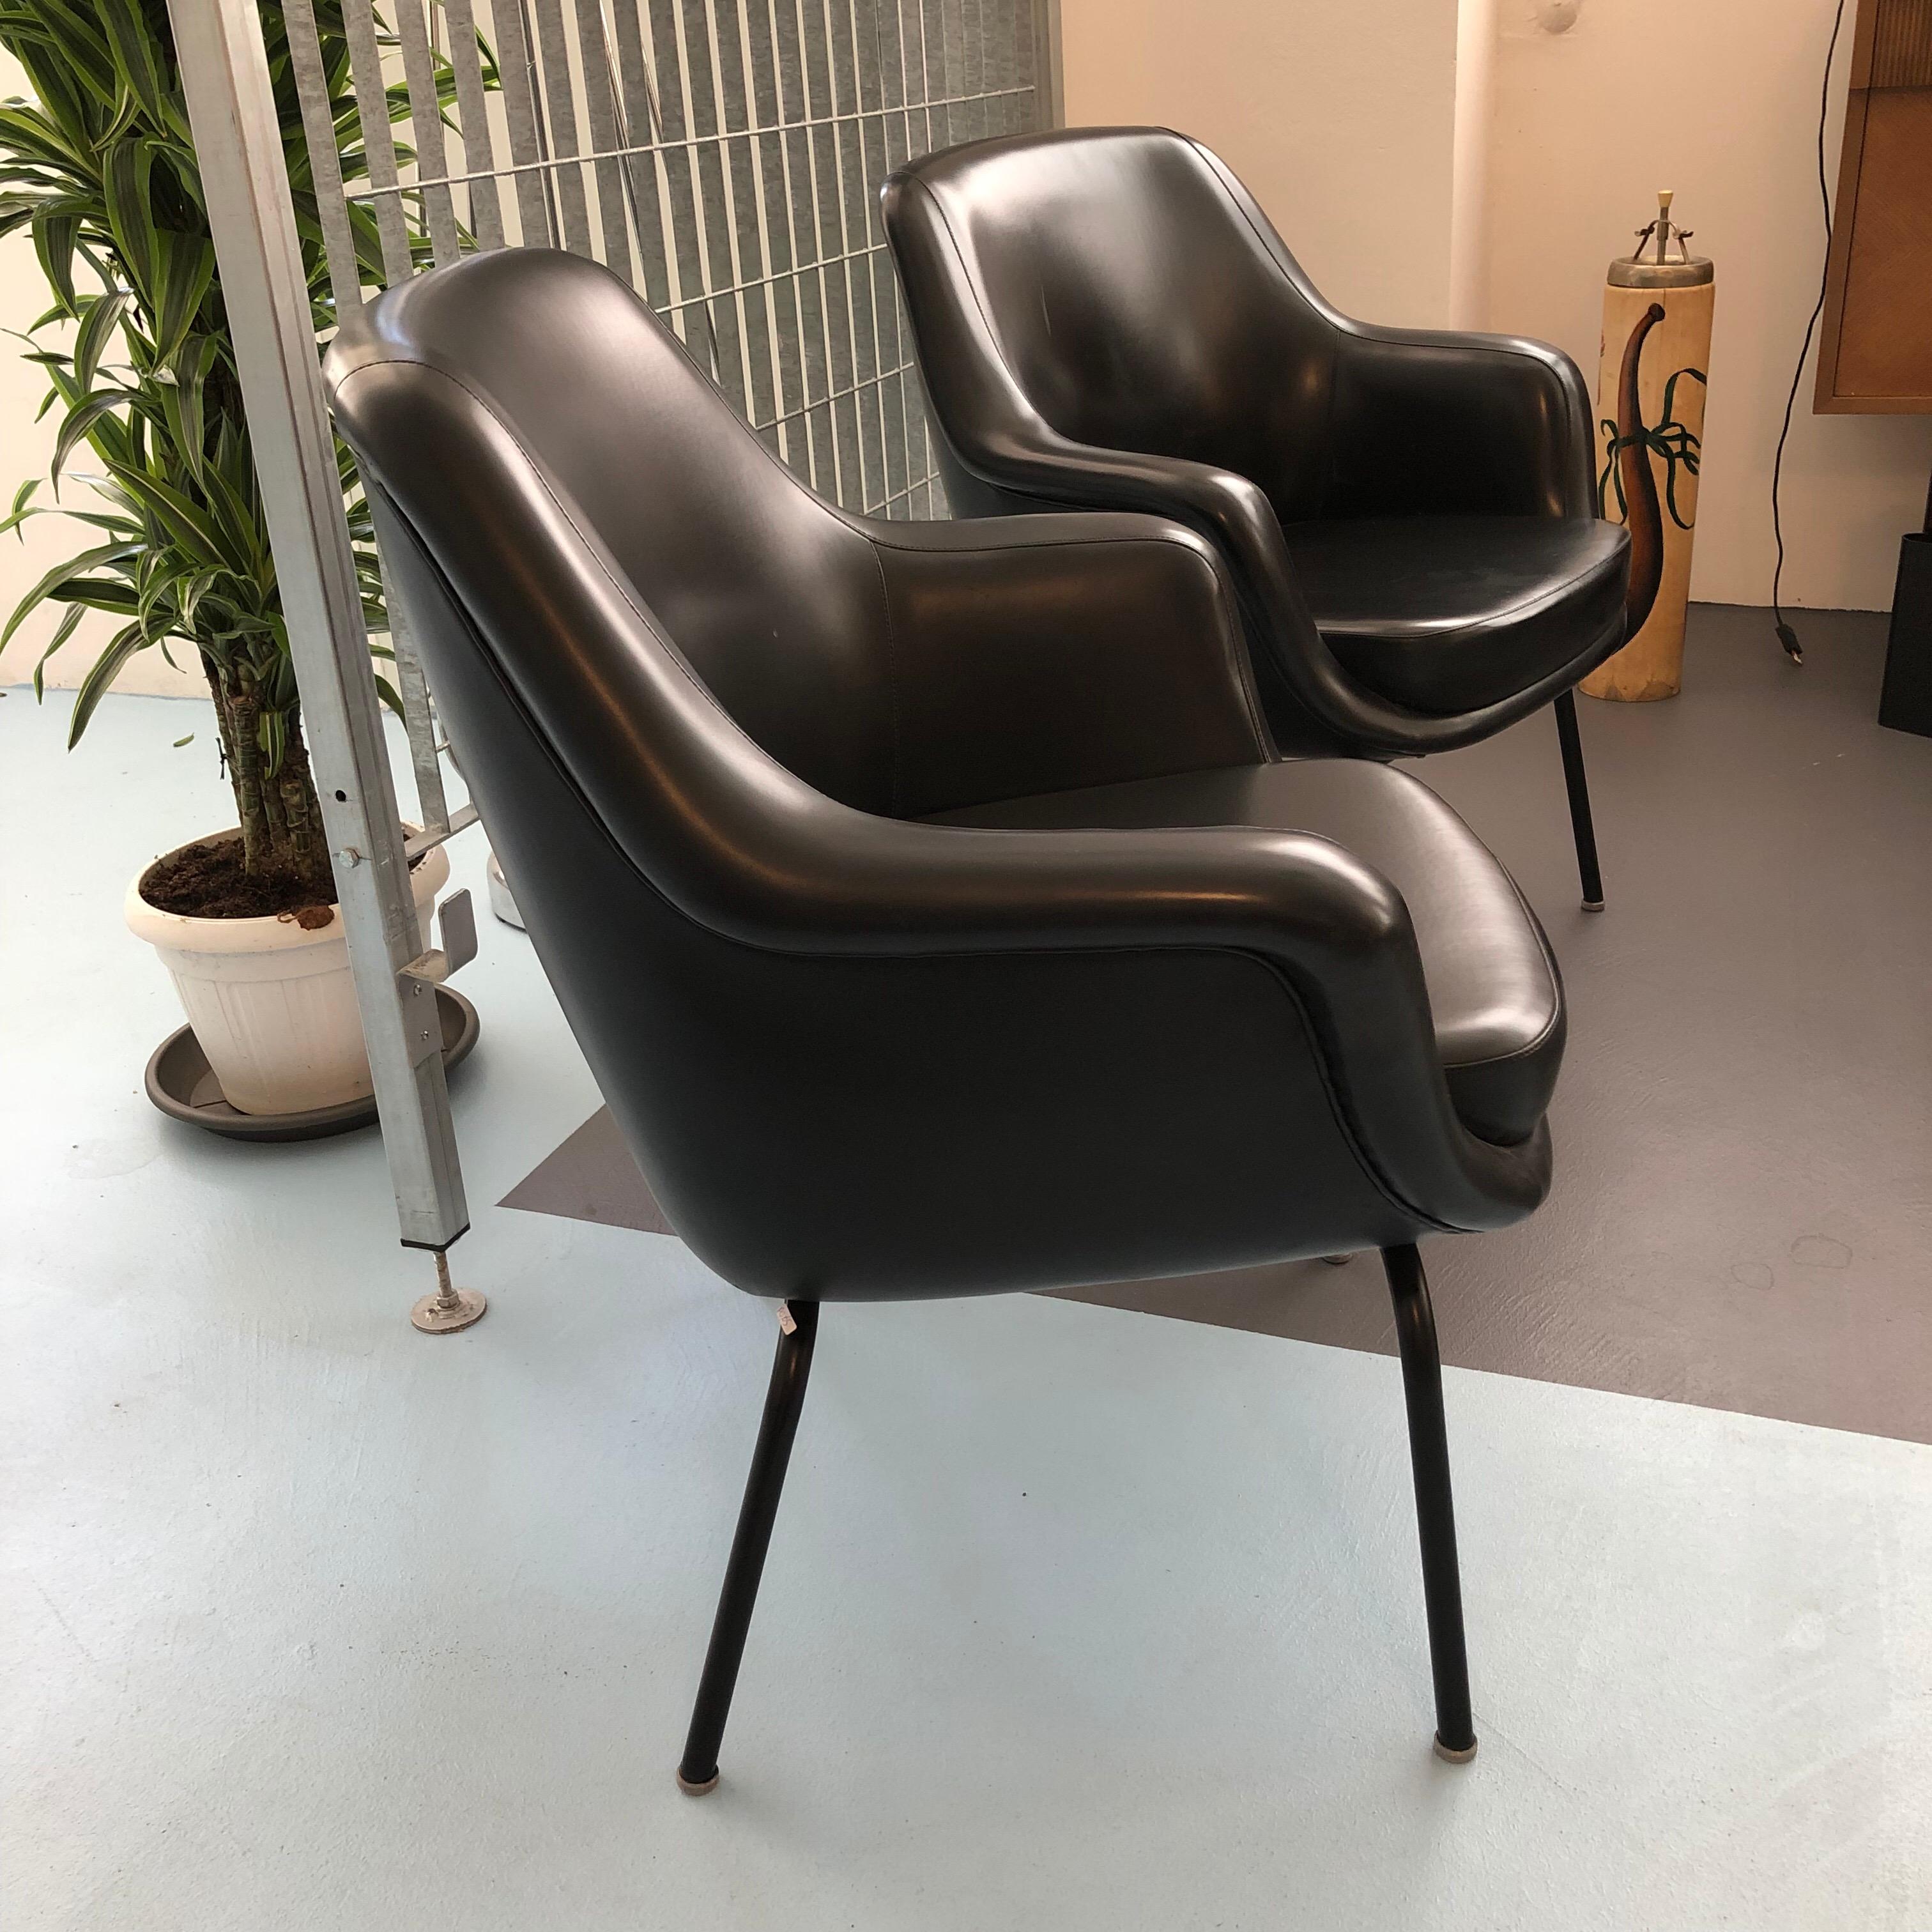 Modern Pair of Olli Mannermaa Armchairs by Cassina, Italy, 1960s For Sale